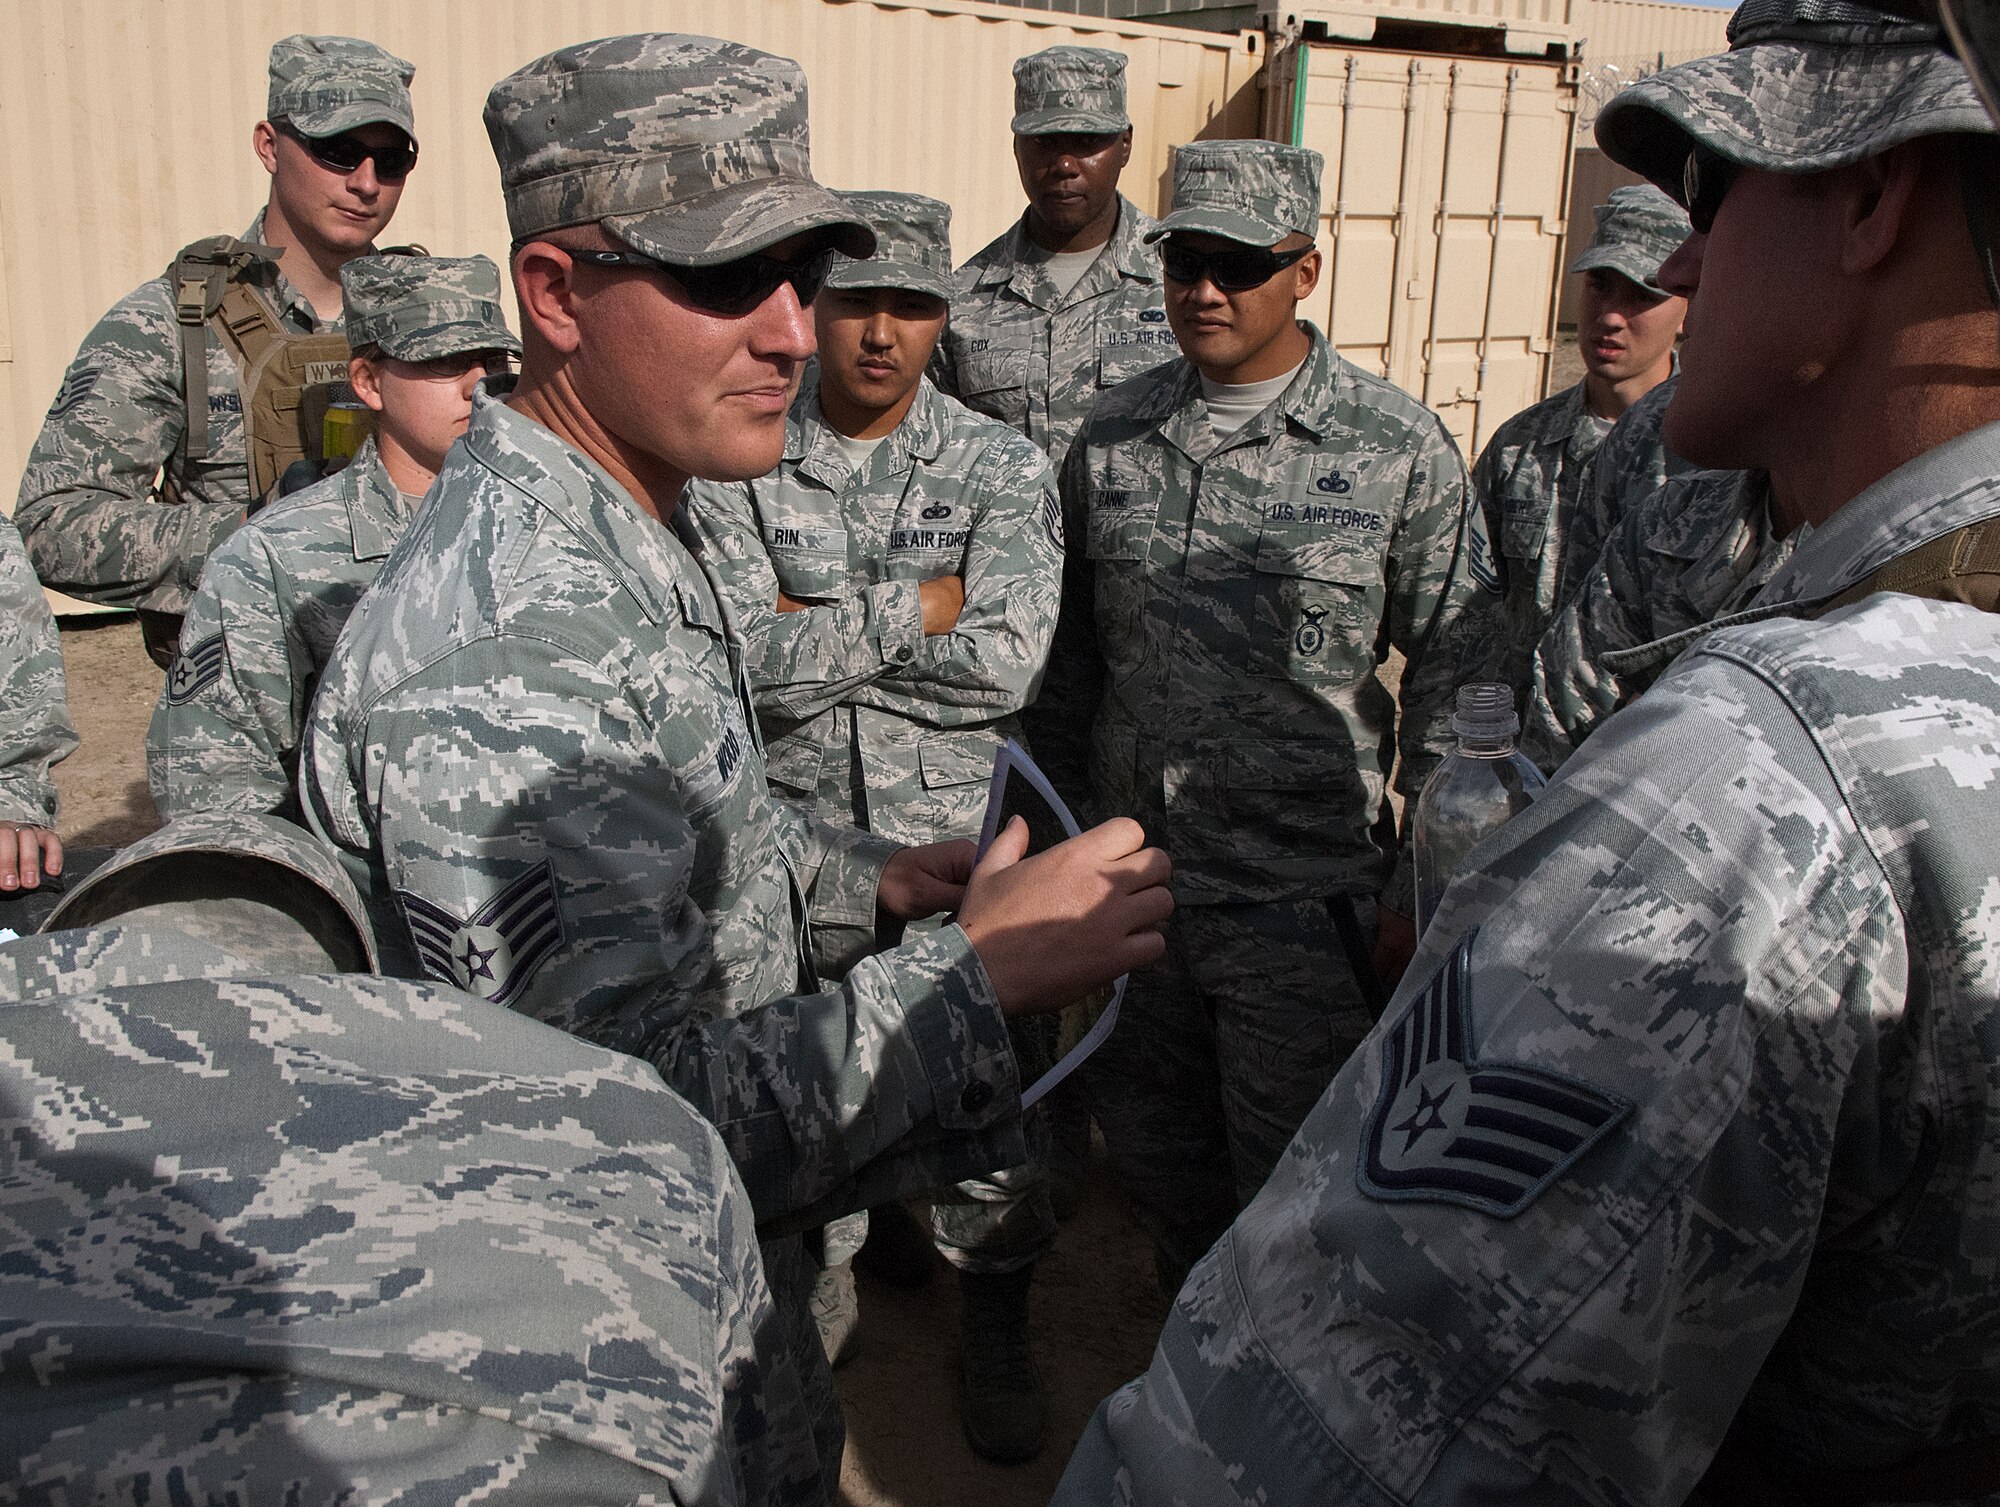 Staff Sgt. Ron Wood, 620th Ground Combat Training Squadron, briefs exercise controllers and observers prior to a training scenario during Road Warrior X a training exercise conducted by the 620th GCTS at Camp Guernsey, Wyo., Oct. 19. (U.S. Air Force photo by R.J. Oriez)